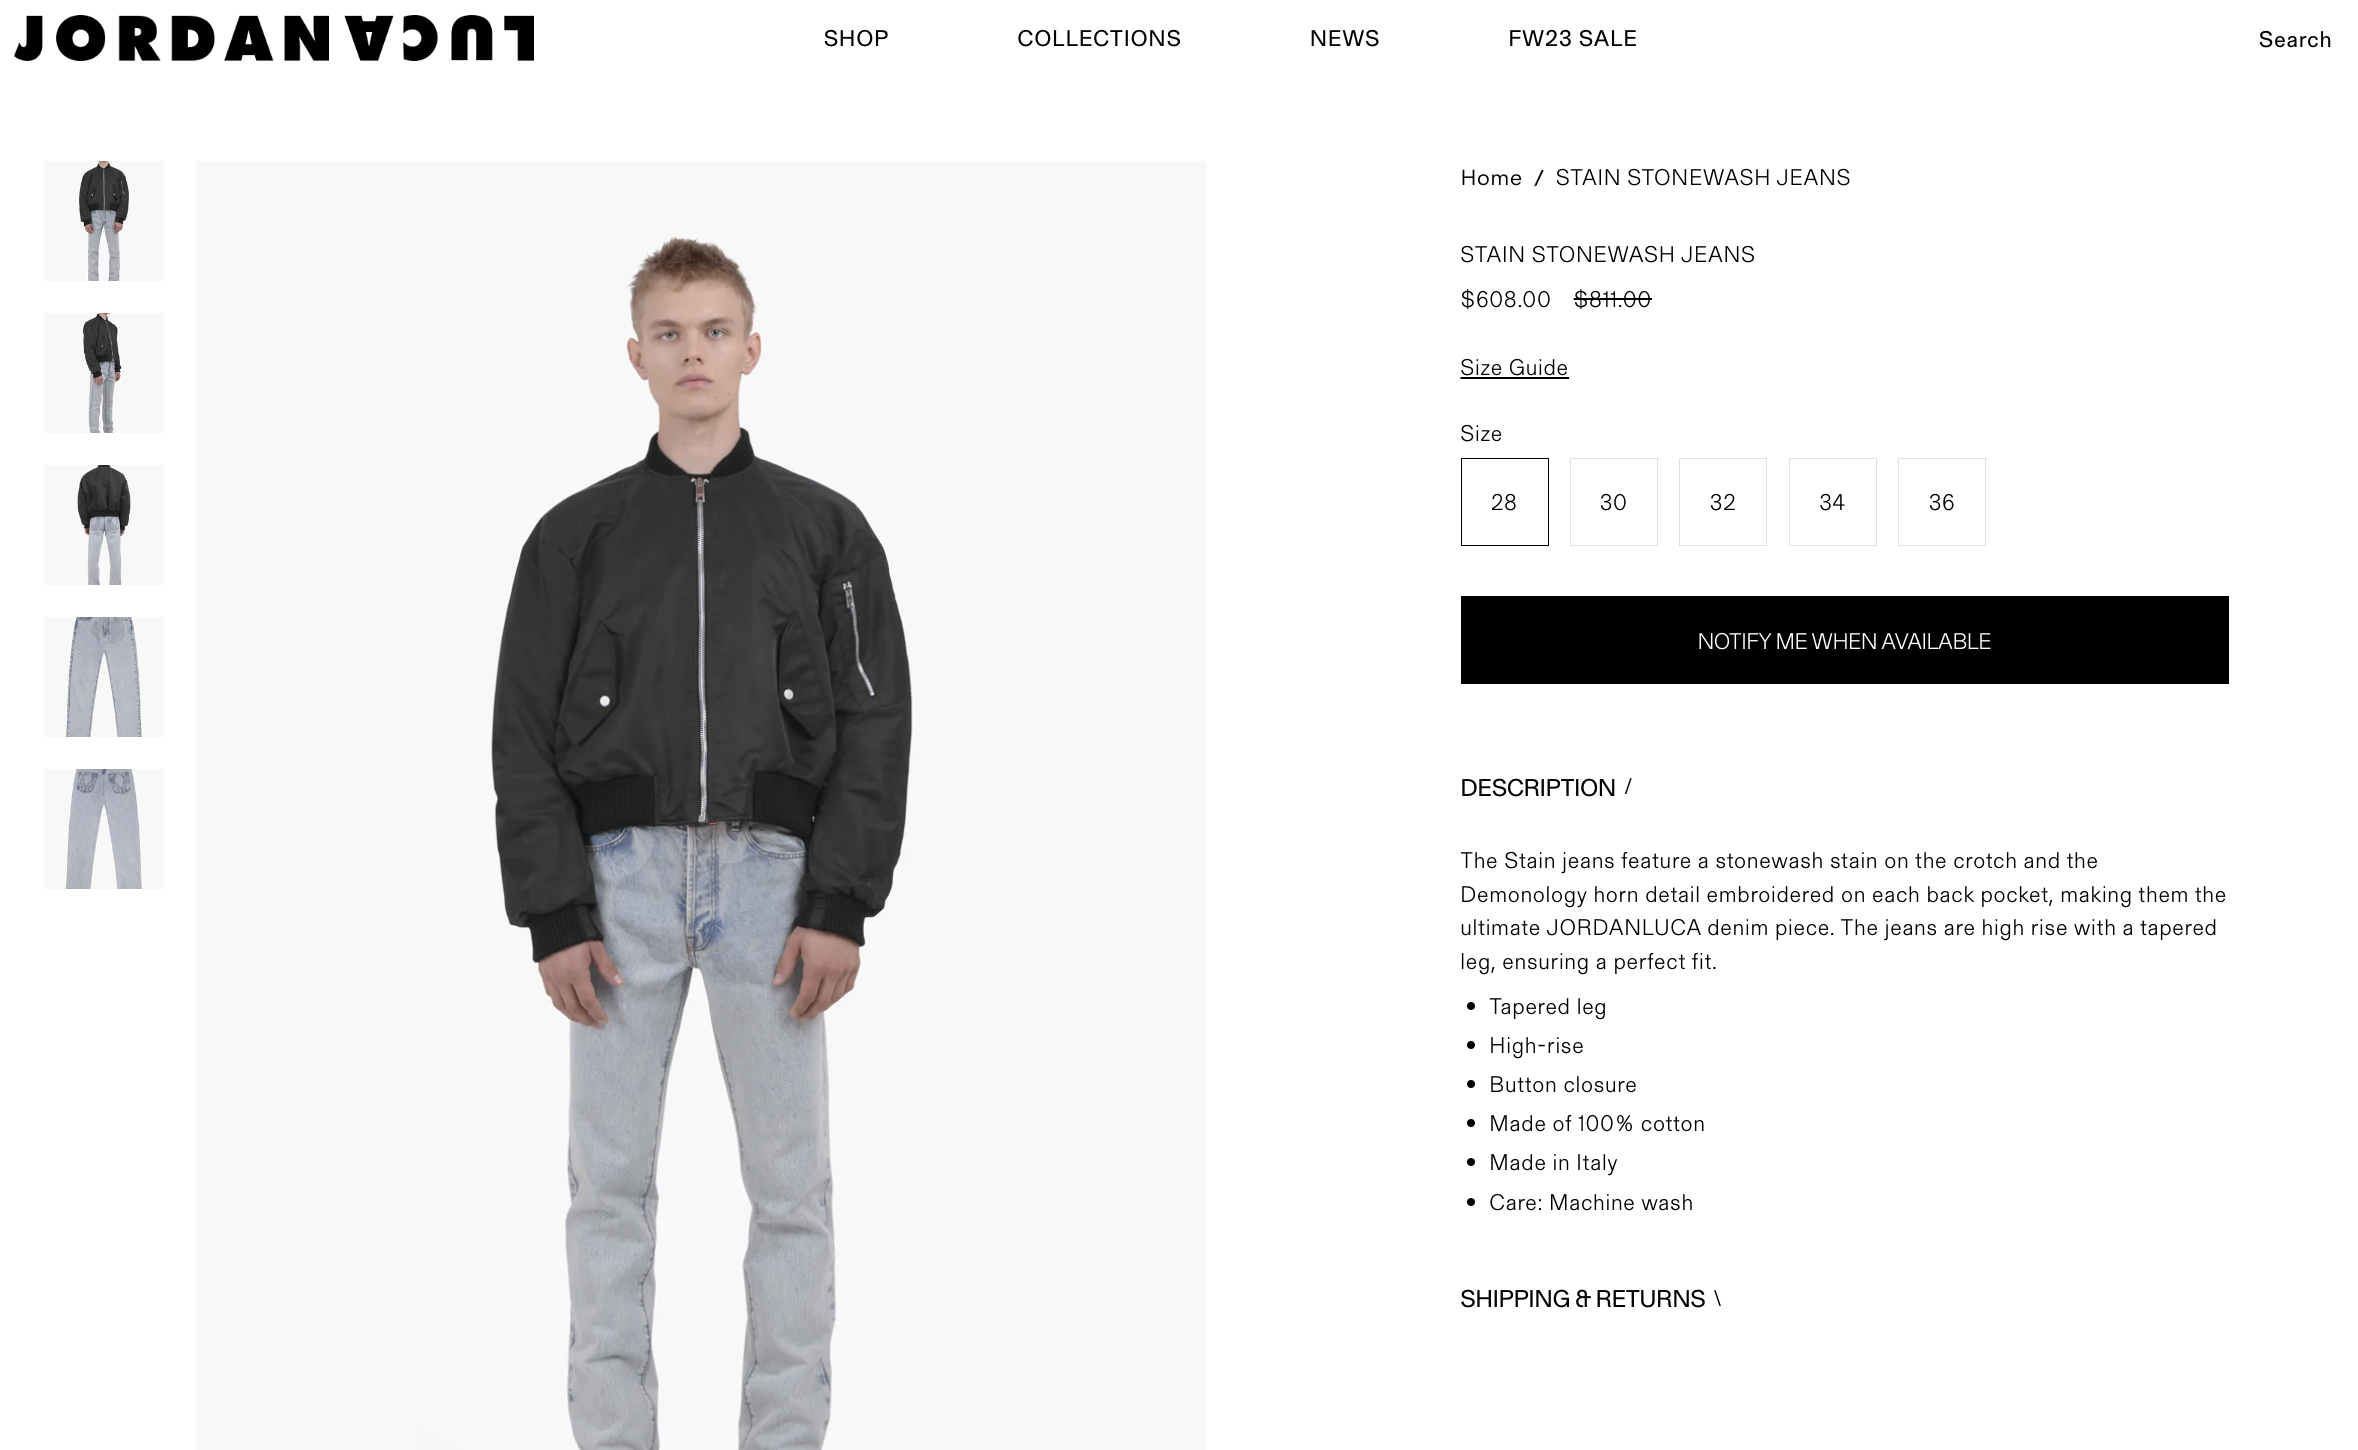 'Call Me Miles Davis': For the Low Price of $800 You Can Look Like You Peed Your Pants